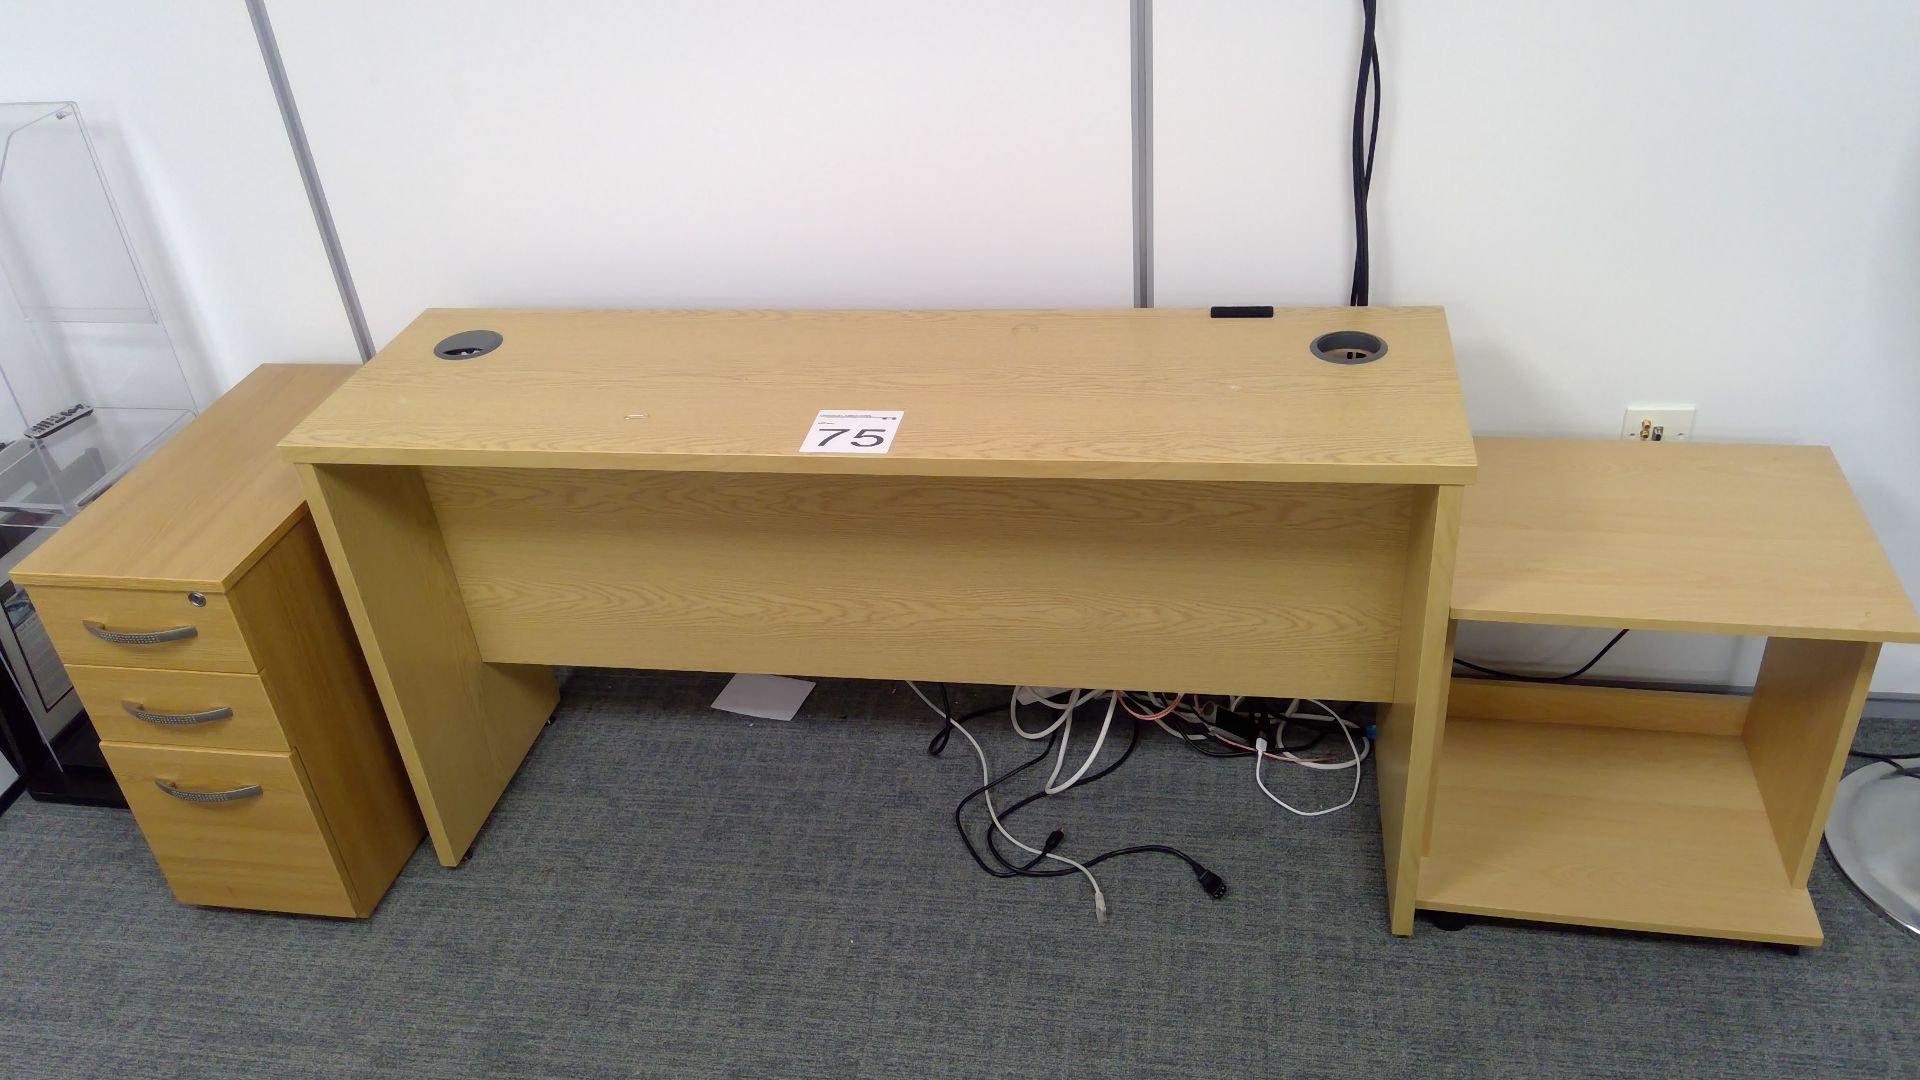 5ft wide oak eefect workstation complete with side table and 3 drawer pedestal